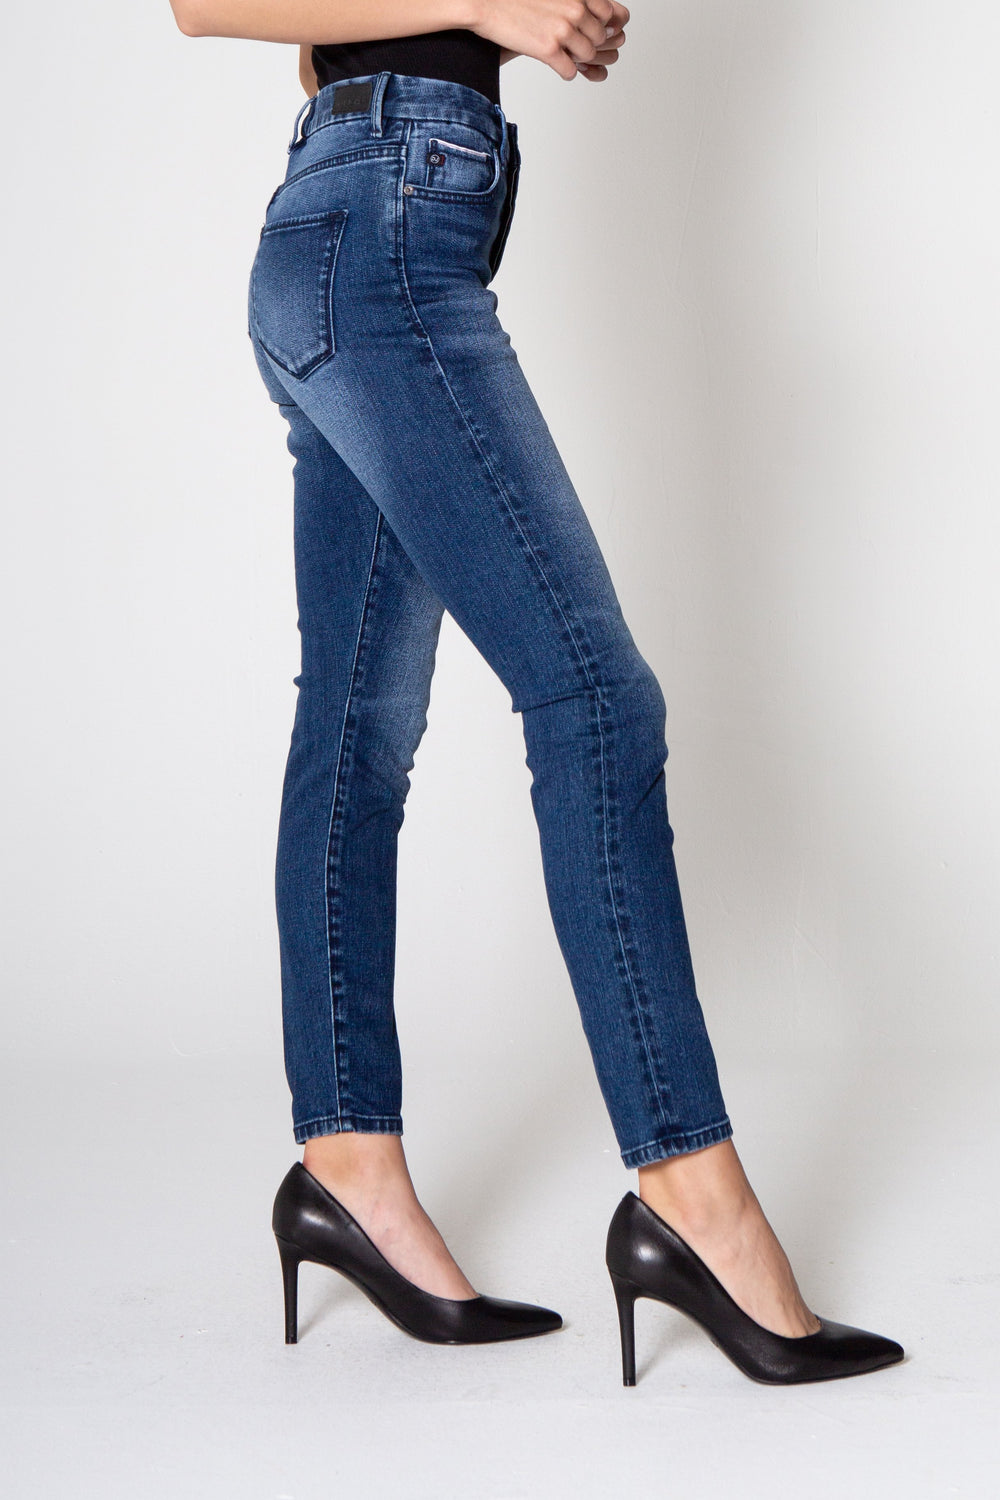 image of a female model wearing a OLIVIA SUPER HIGH RISE ANKLE SKINNY JEANS COLVILLE JEANS